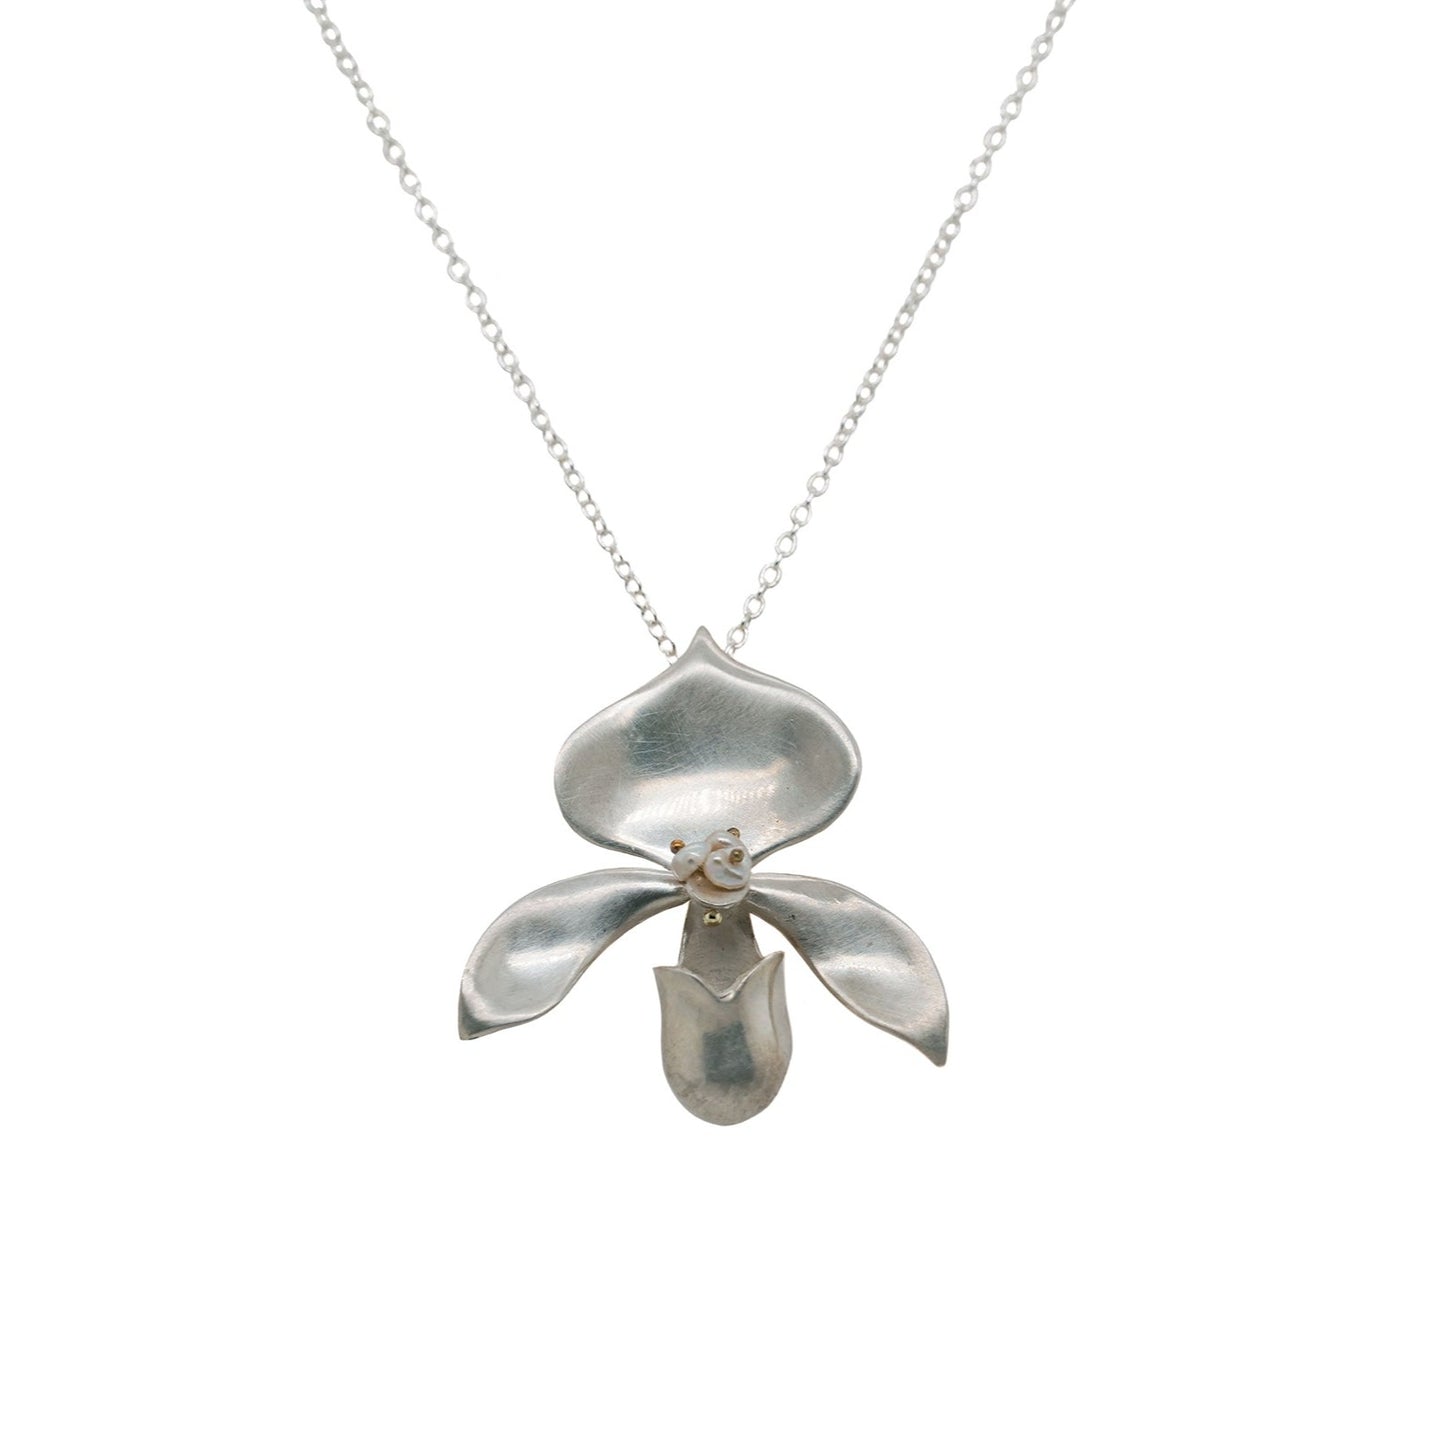 Lady Slipper Orchid Necklace